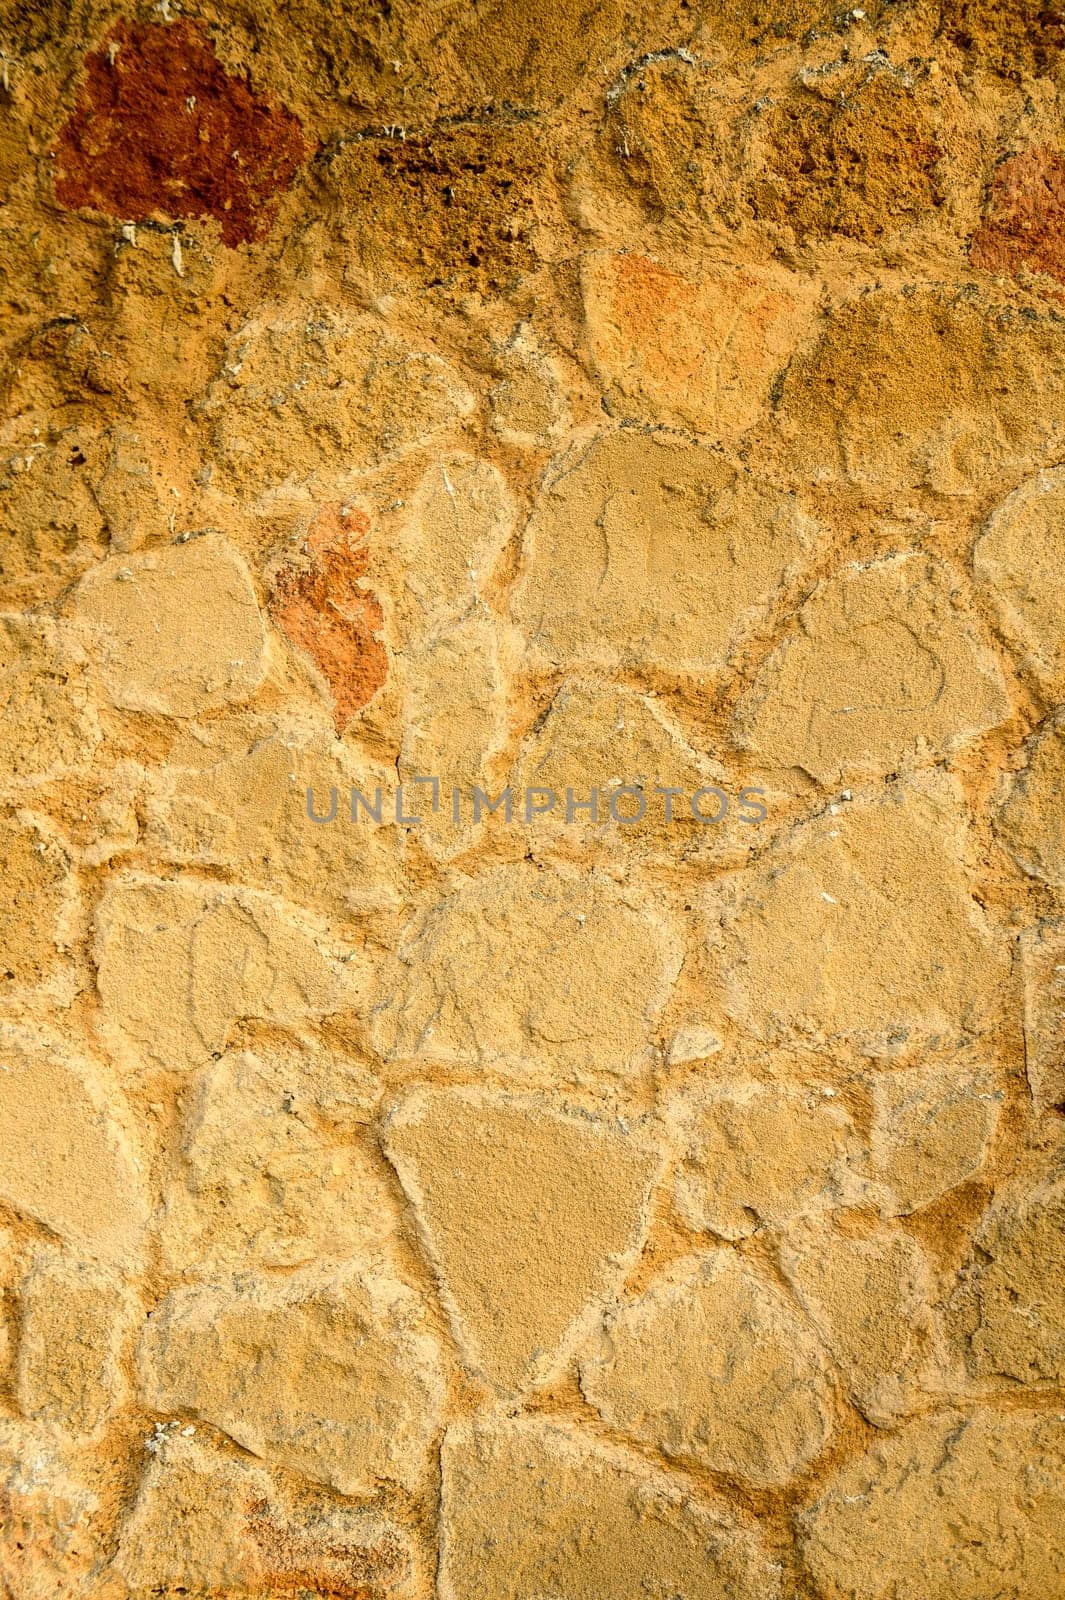 House wall made of natural stones and shell rock as background 1